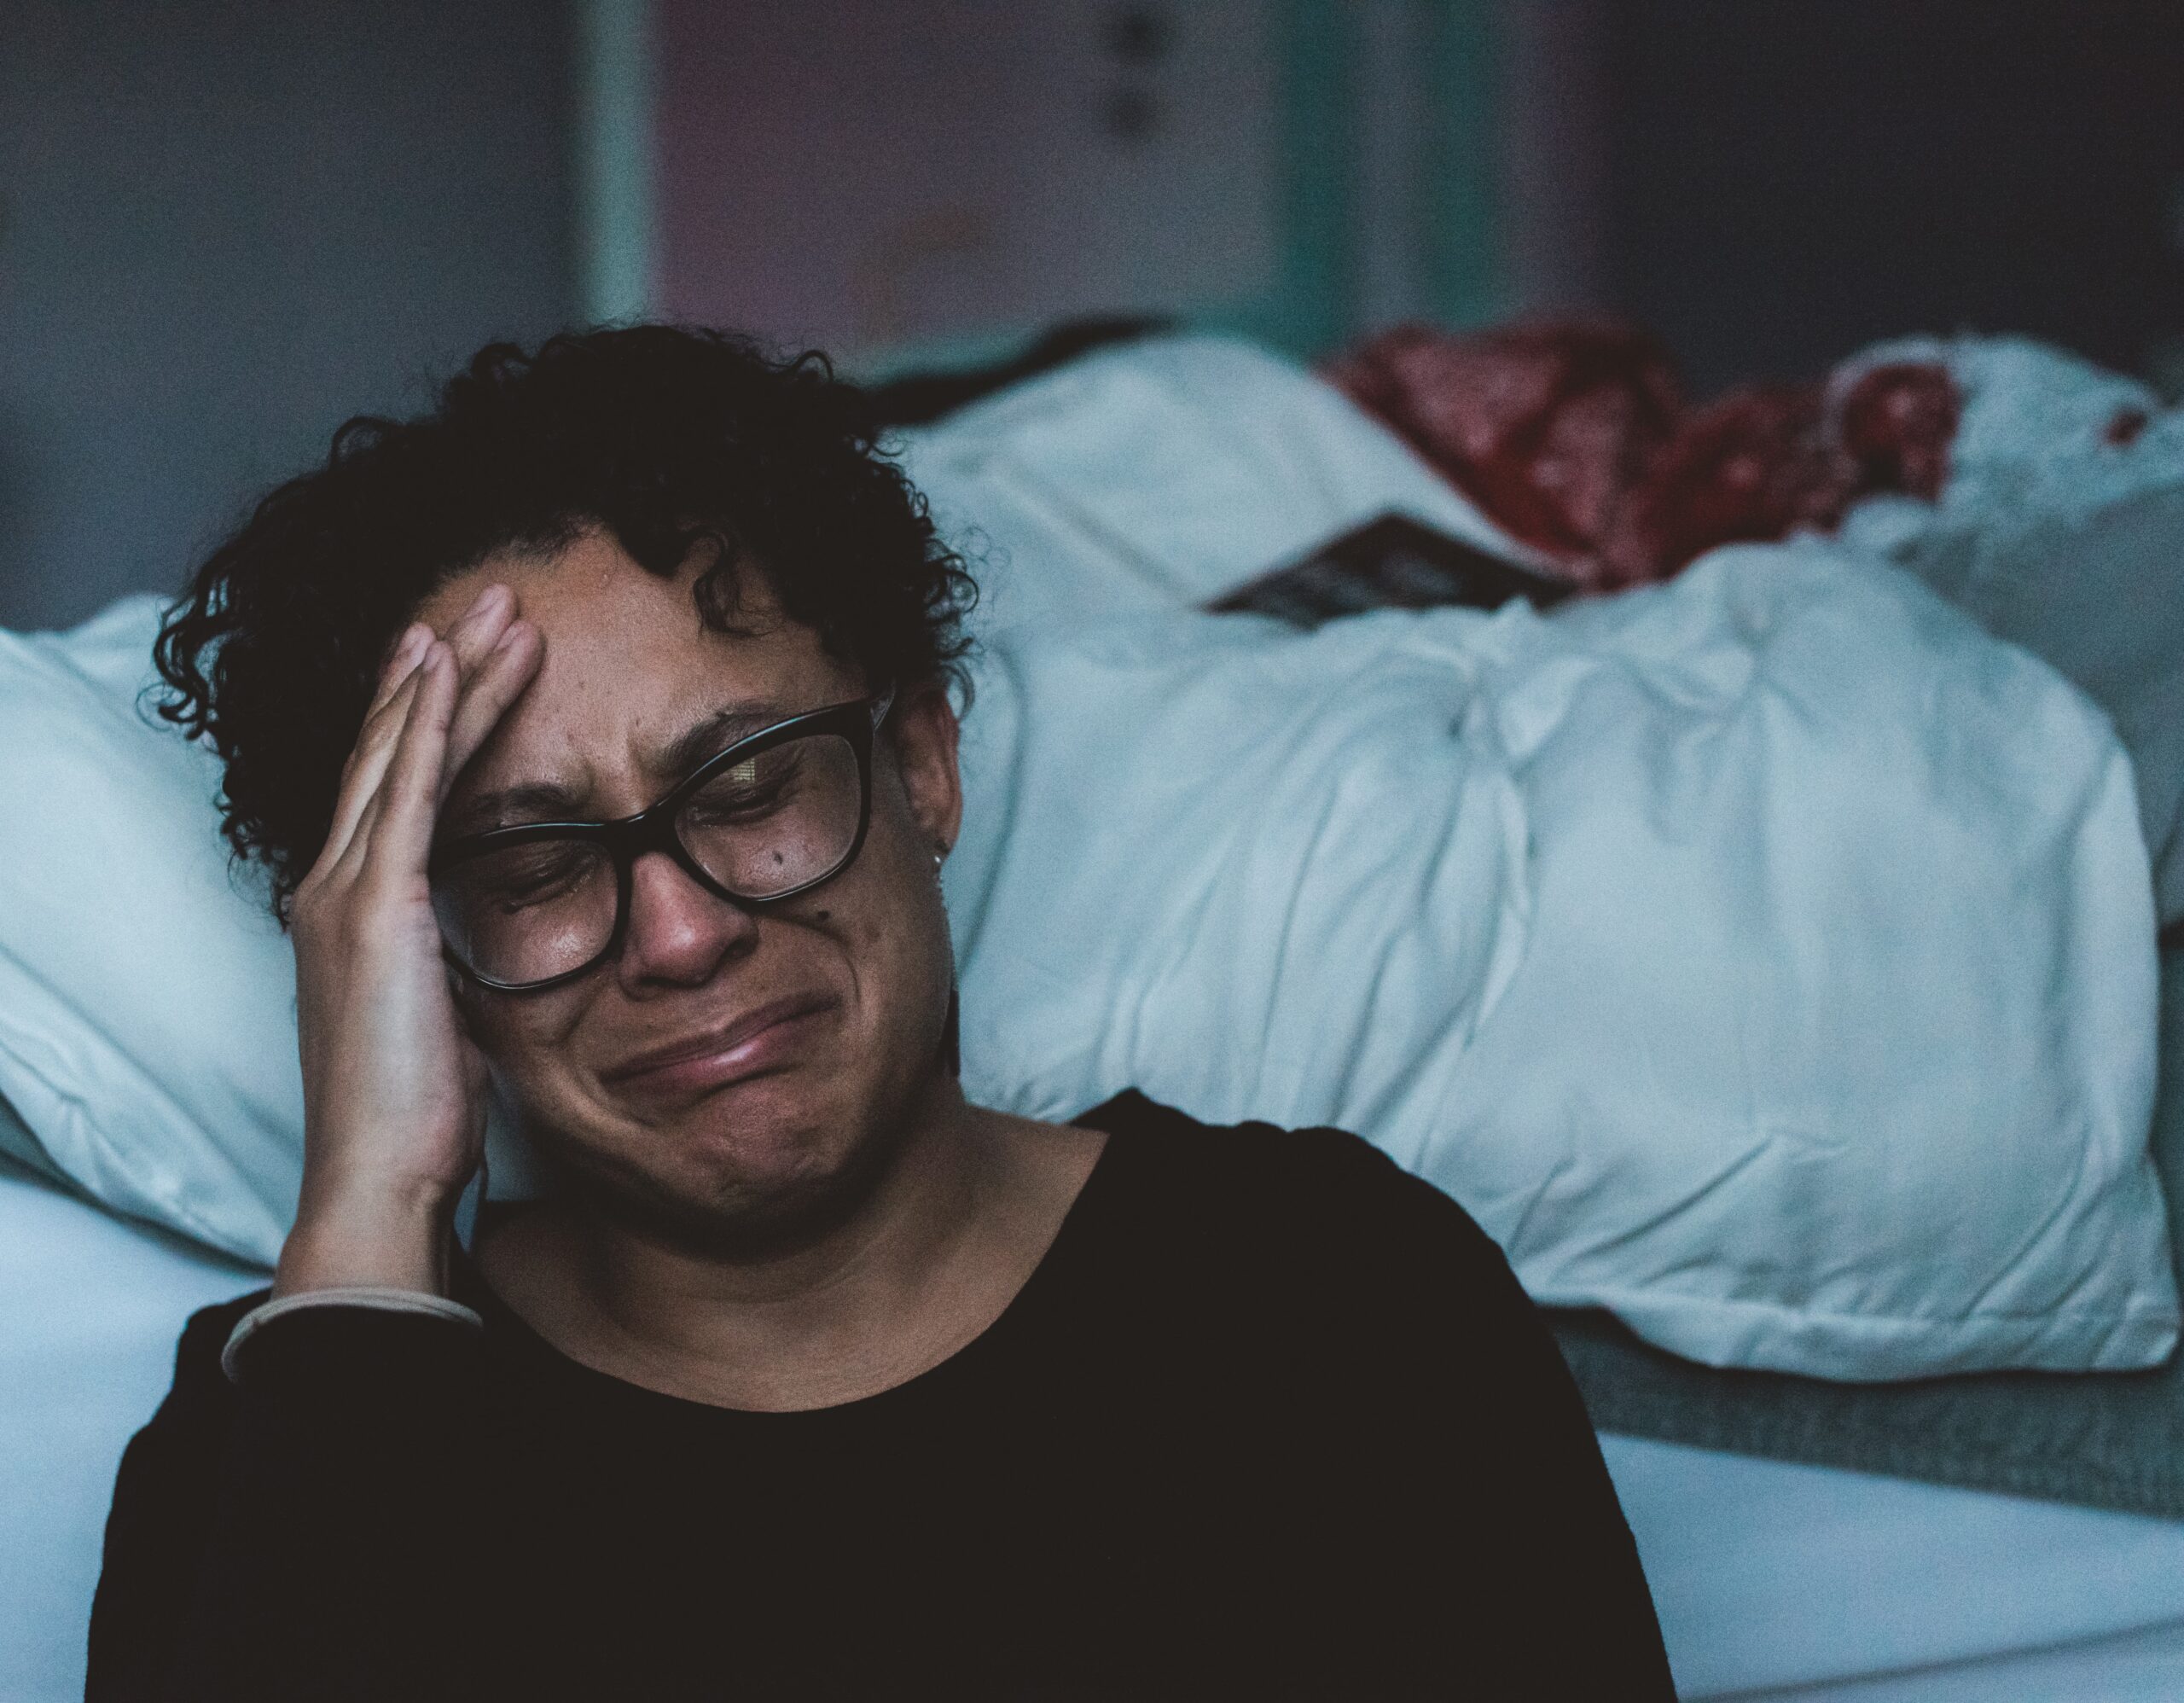 woman crying by bed